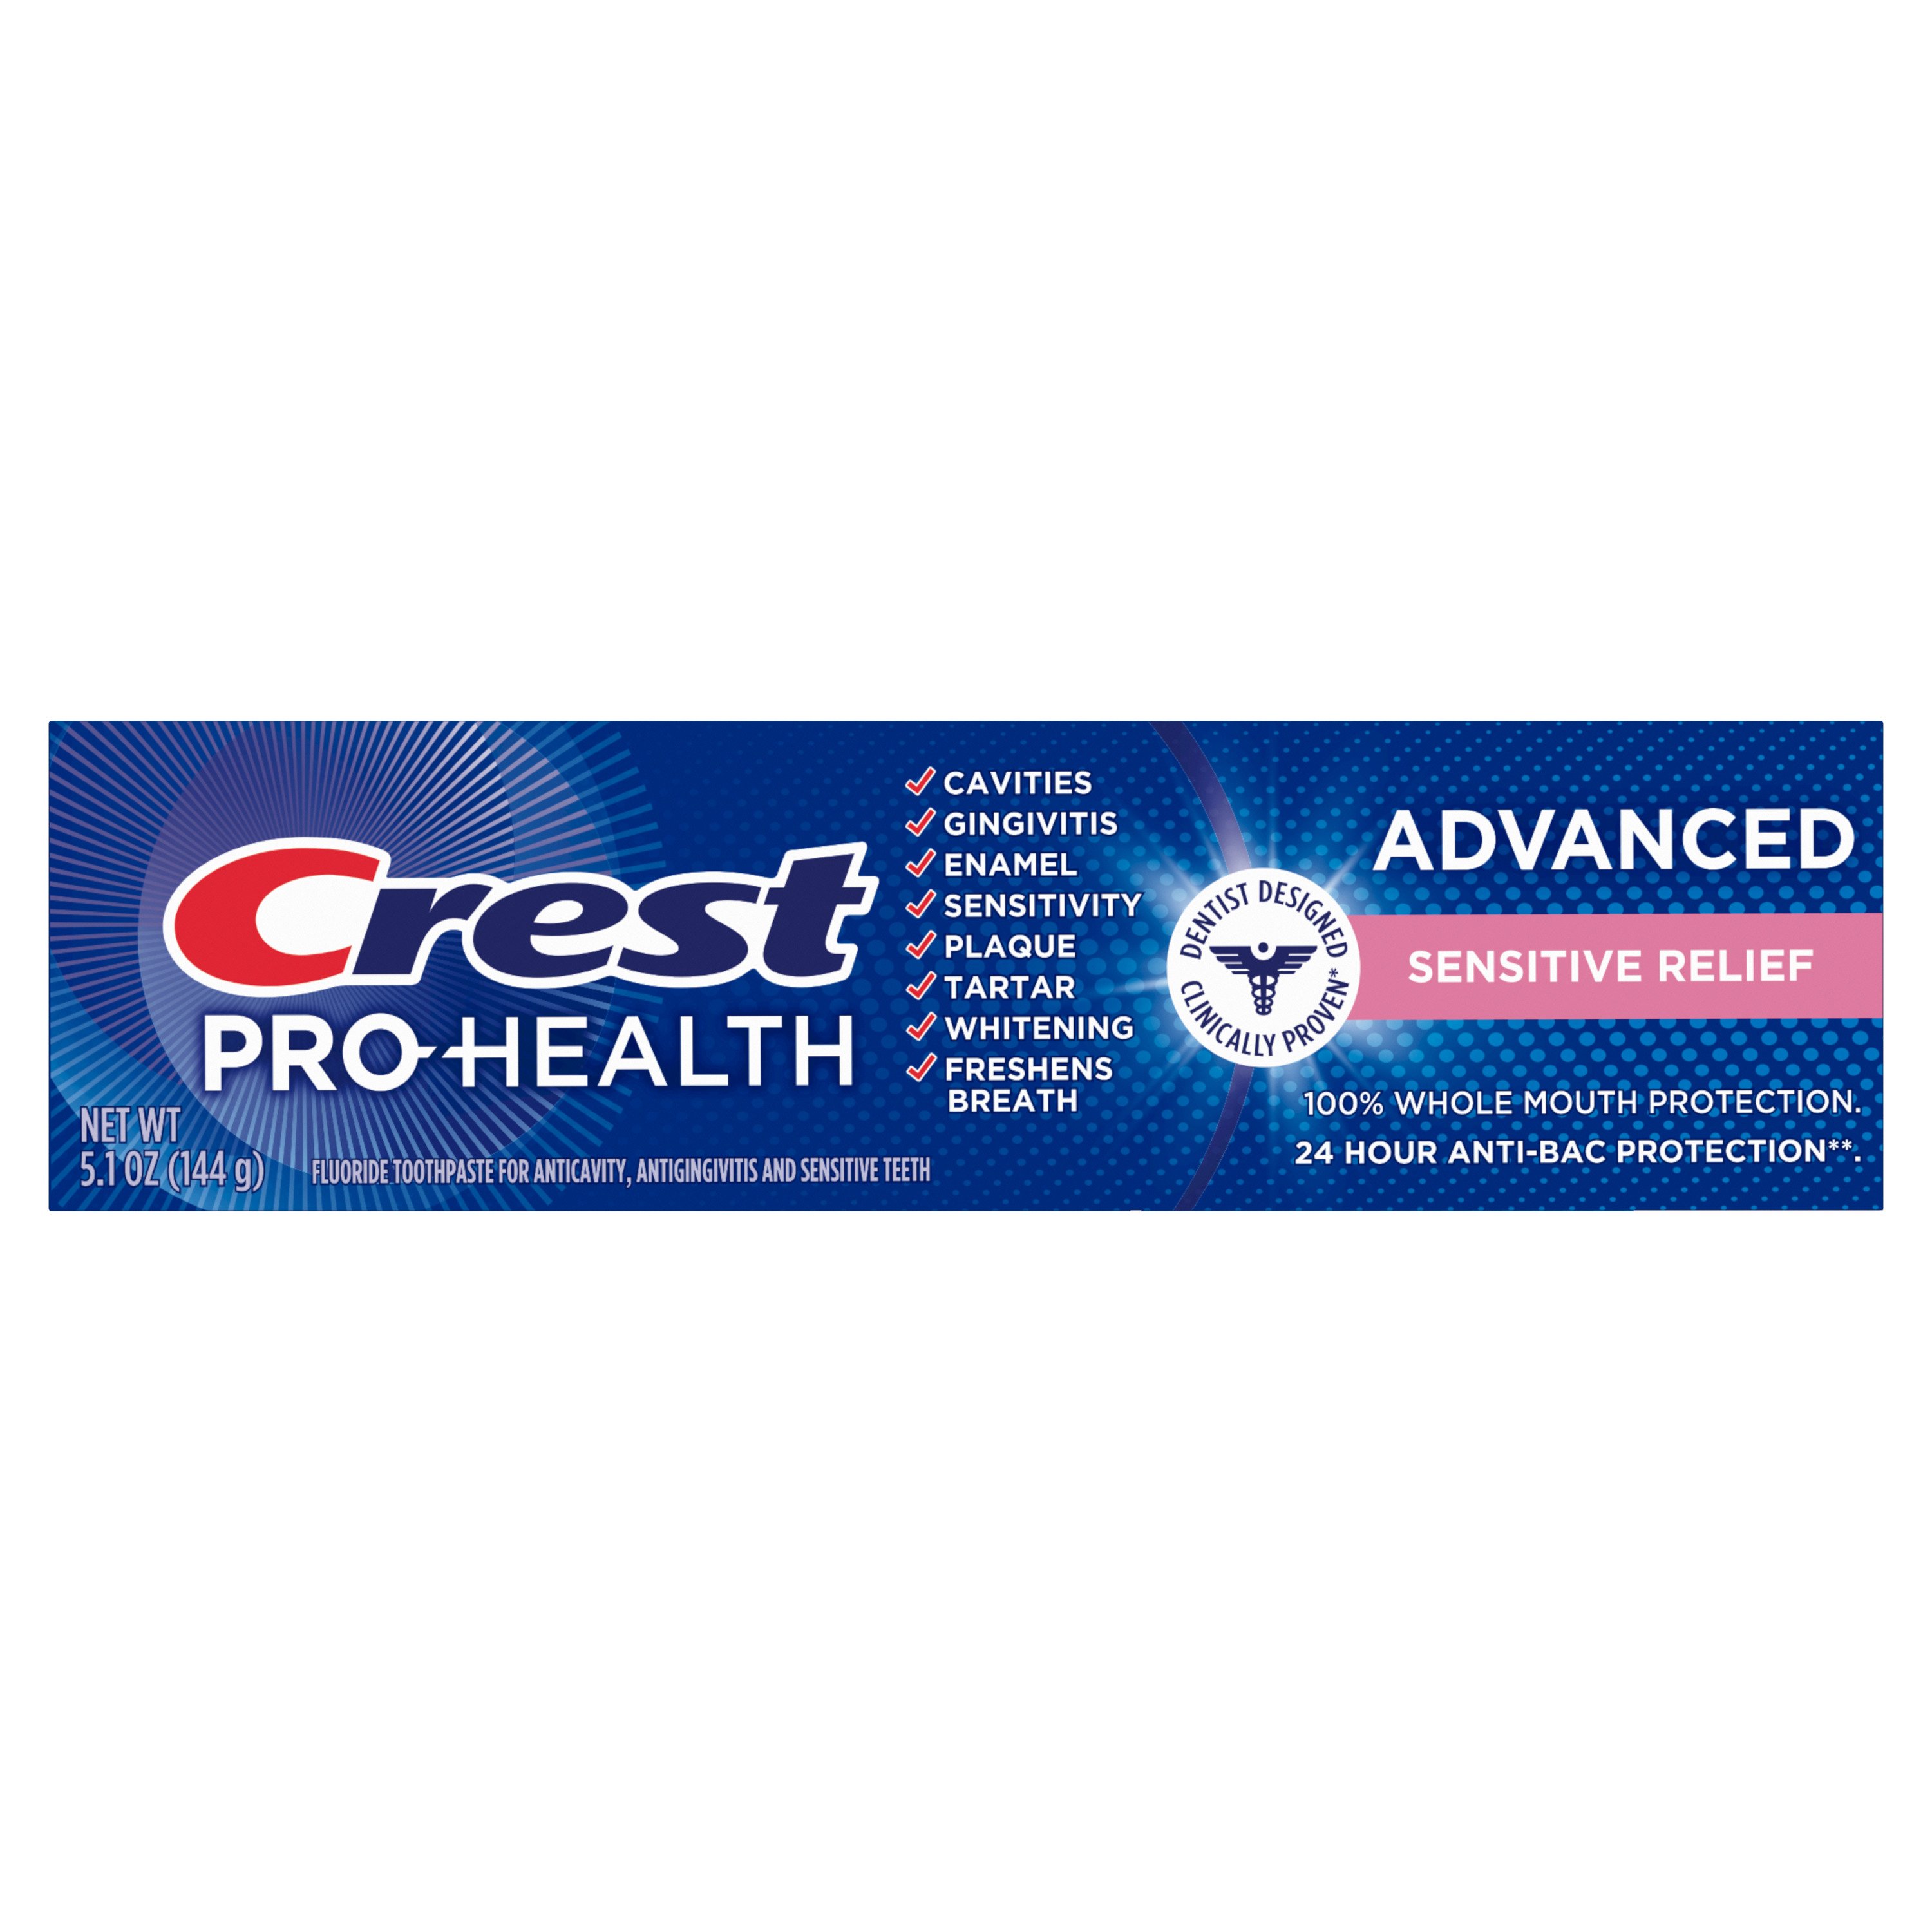 Crest Pro Health Advanced Sensitive Relief Toothpaste Shop Toothpaste